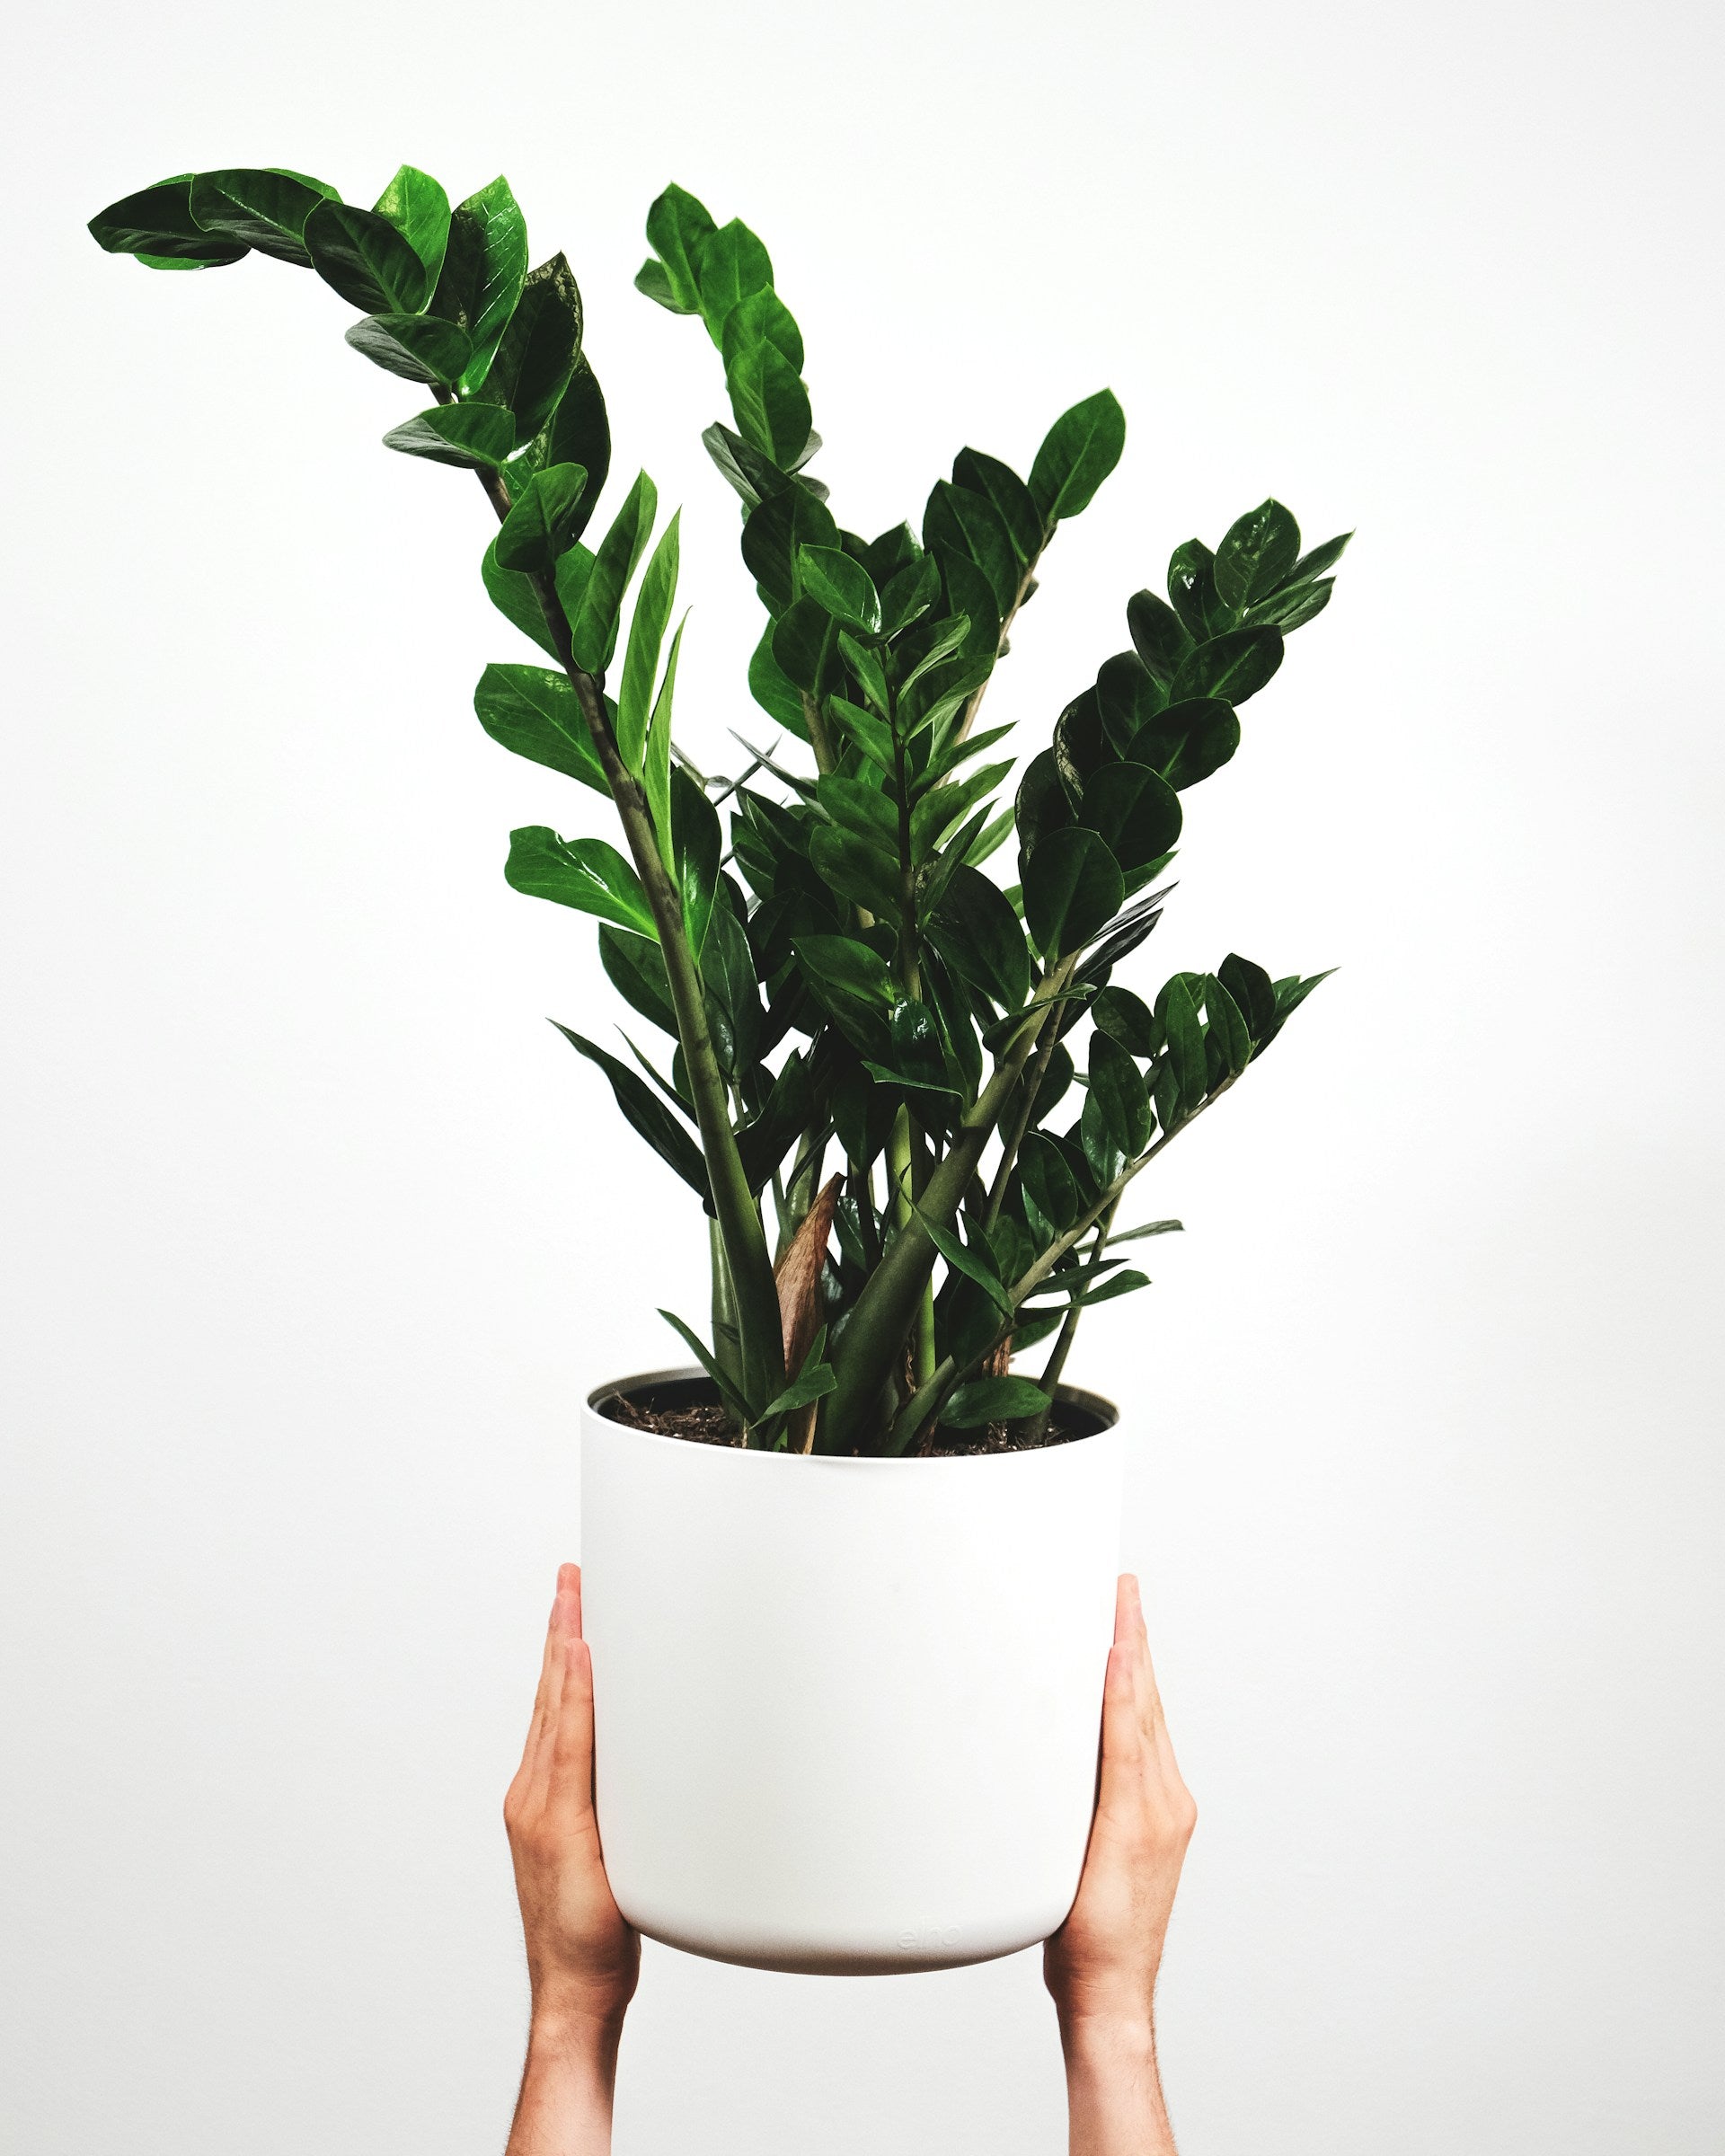 A image of two hands holding up a ZZ plant against a white backdrop